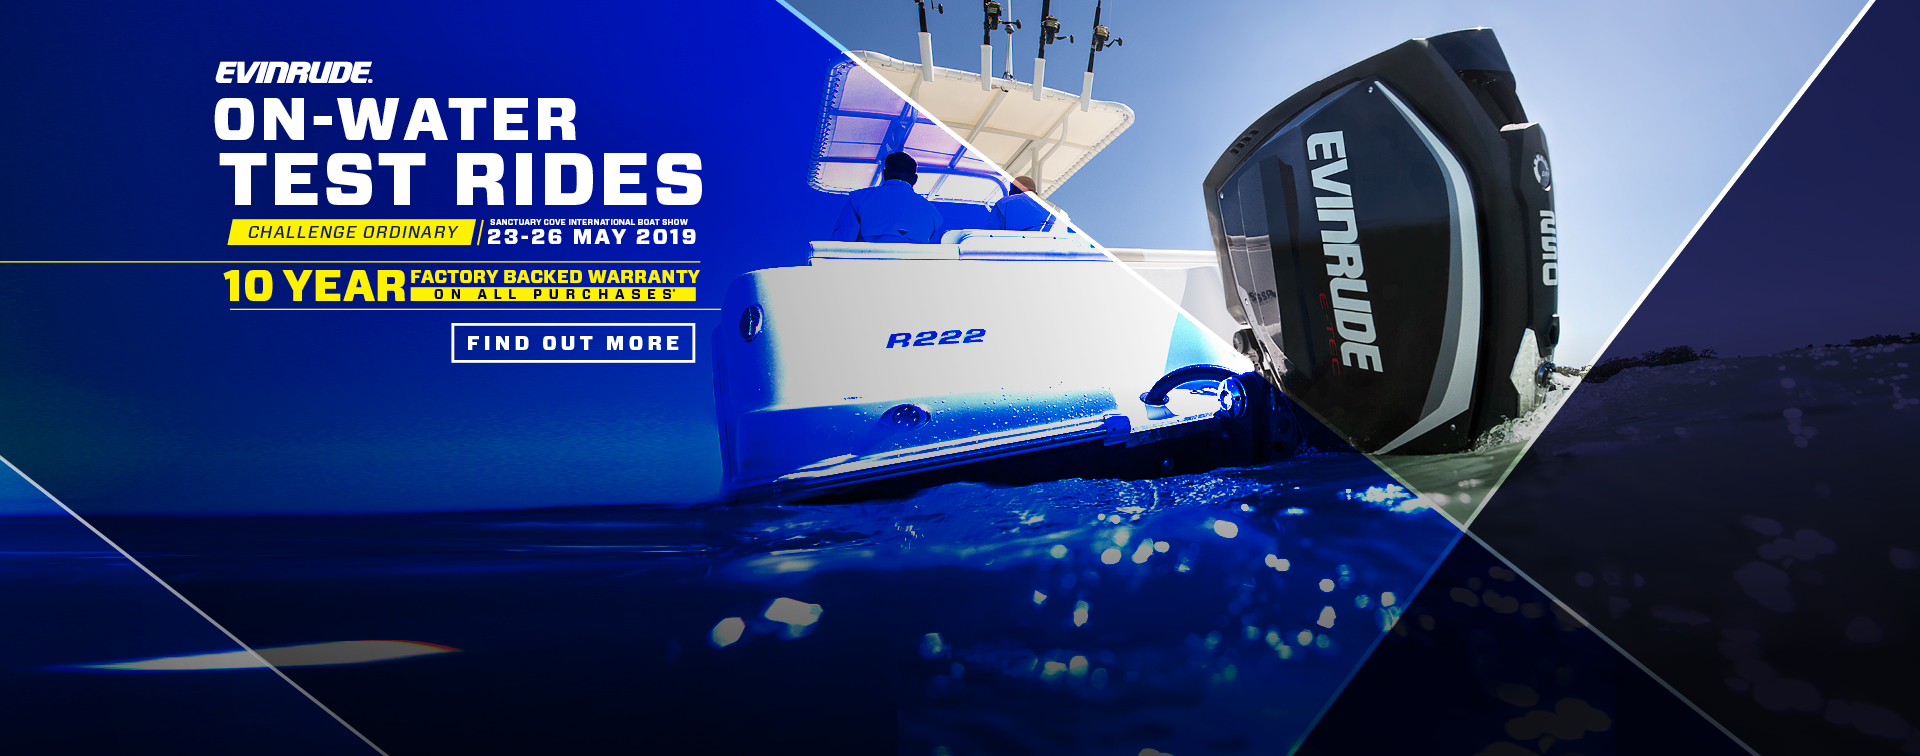 Experience the Outboards of the Future